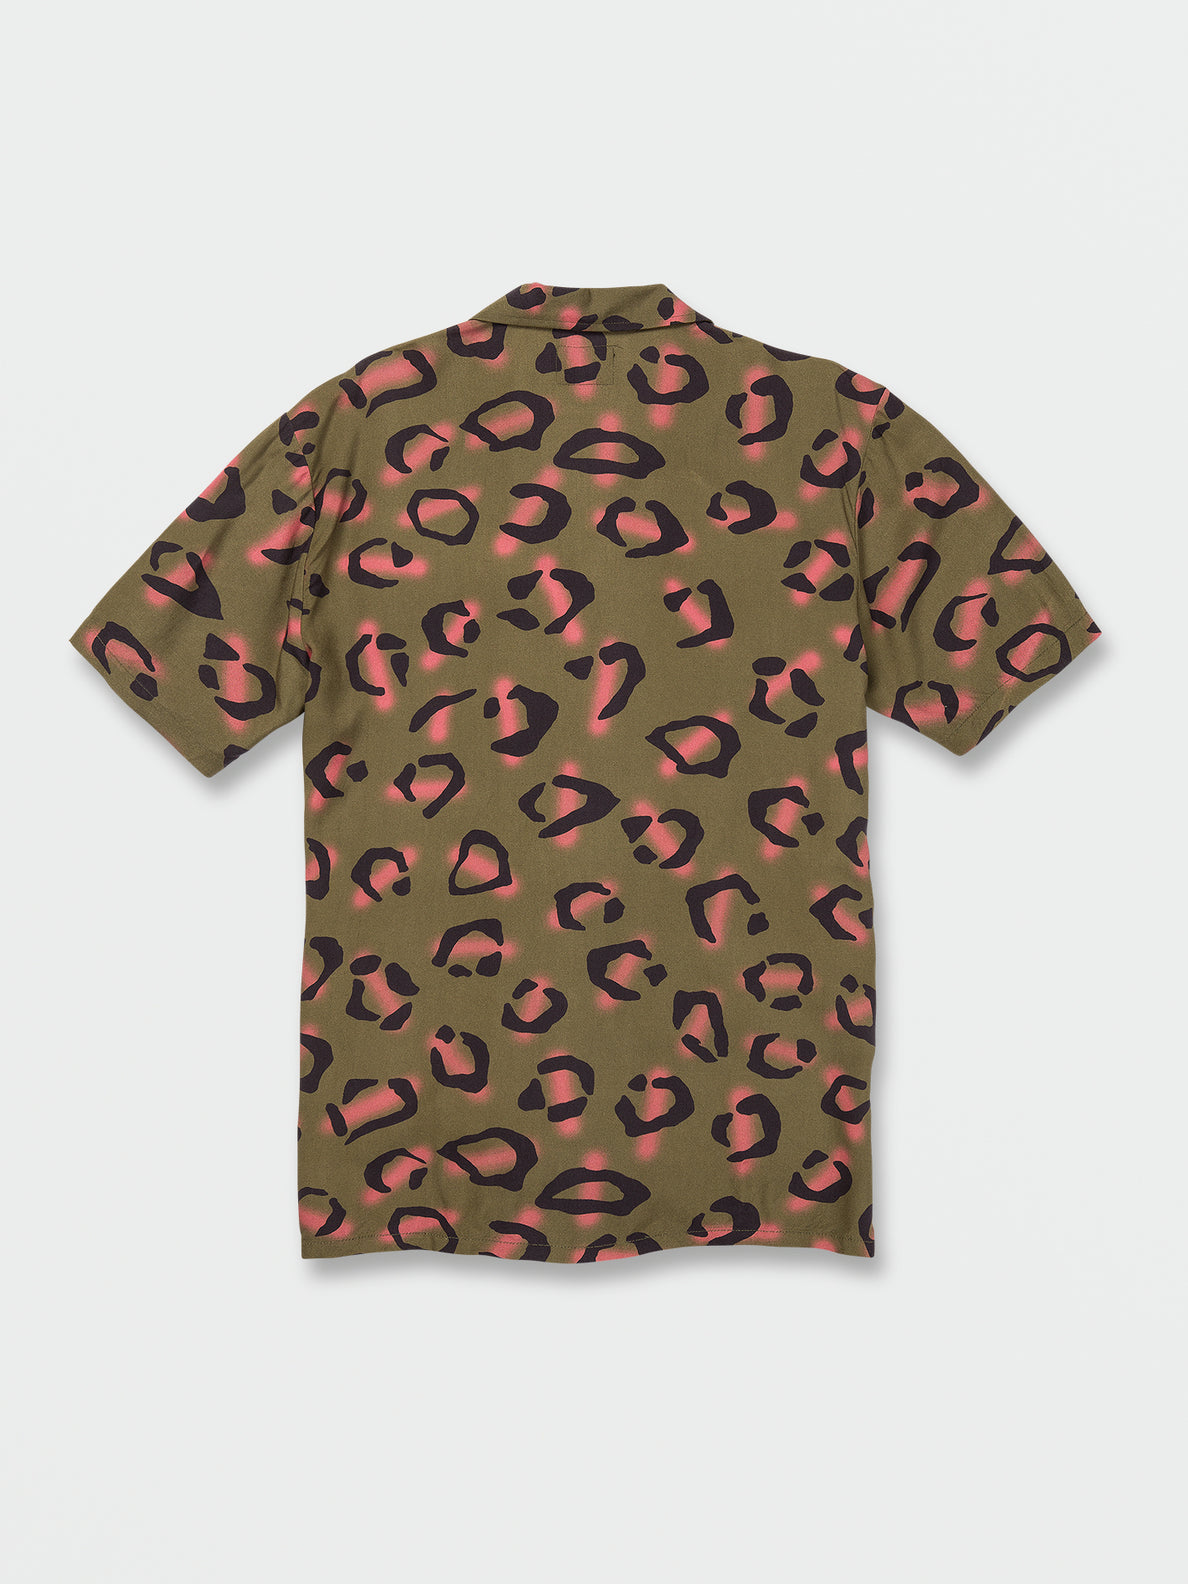 Stone Party Animals Short Sleeve Shirt - Military (A0422301_MIL) [B]